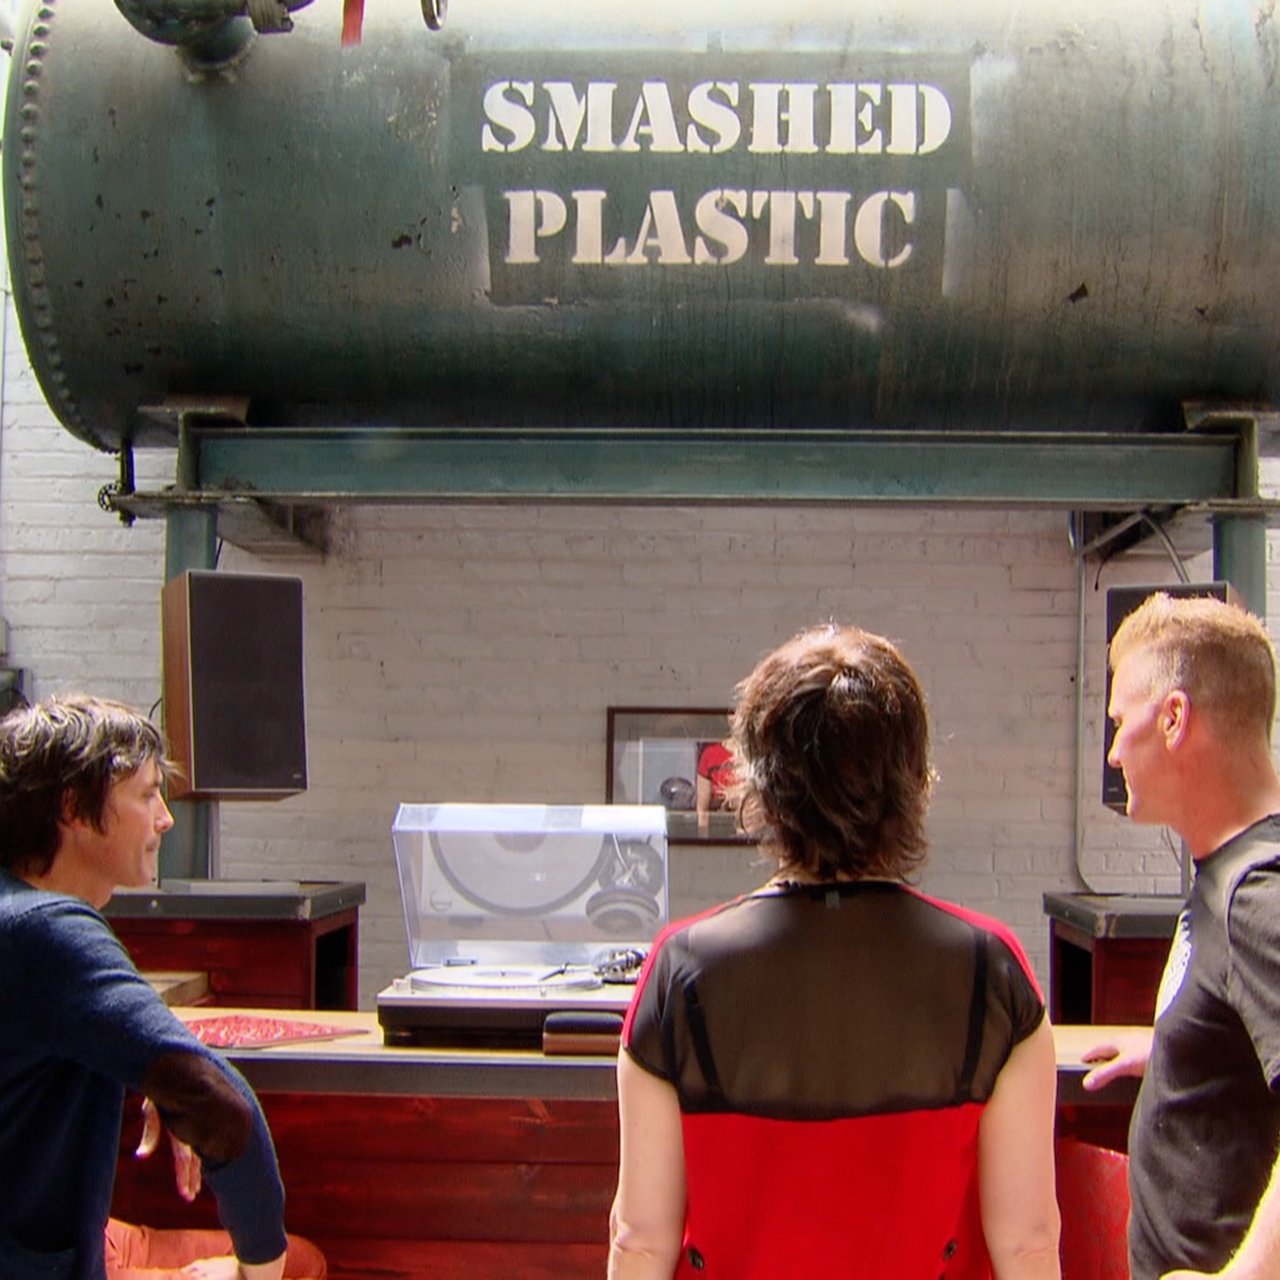 Watch Vinyl Records Being Made at Smashed Plastic